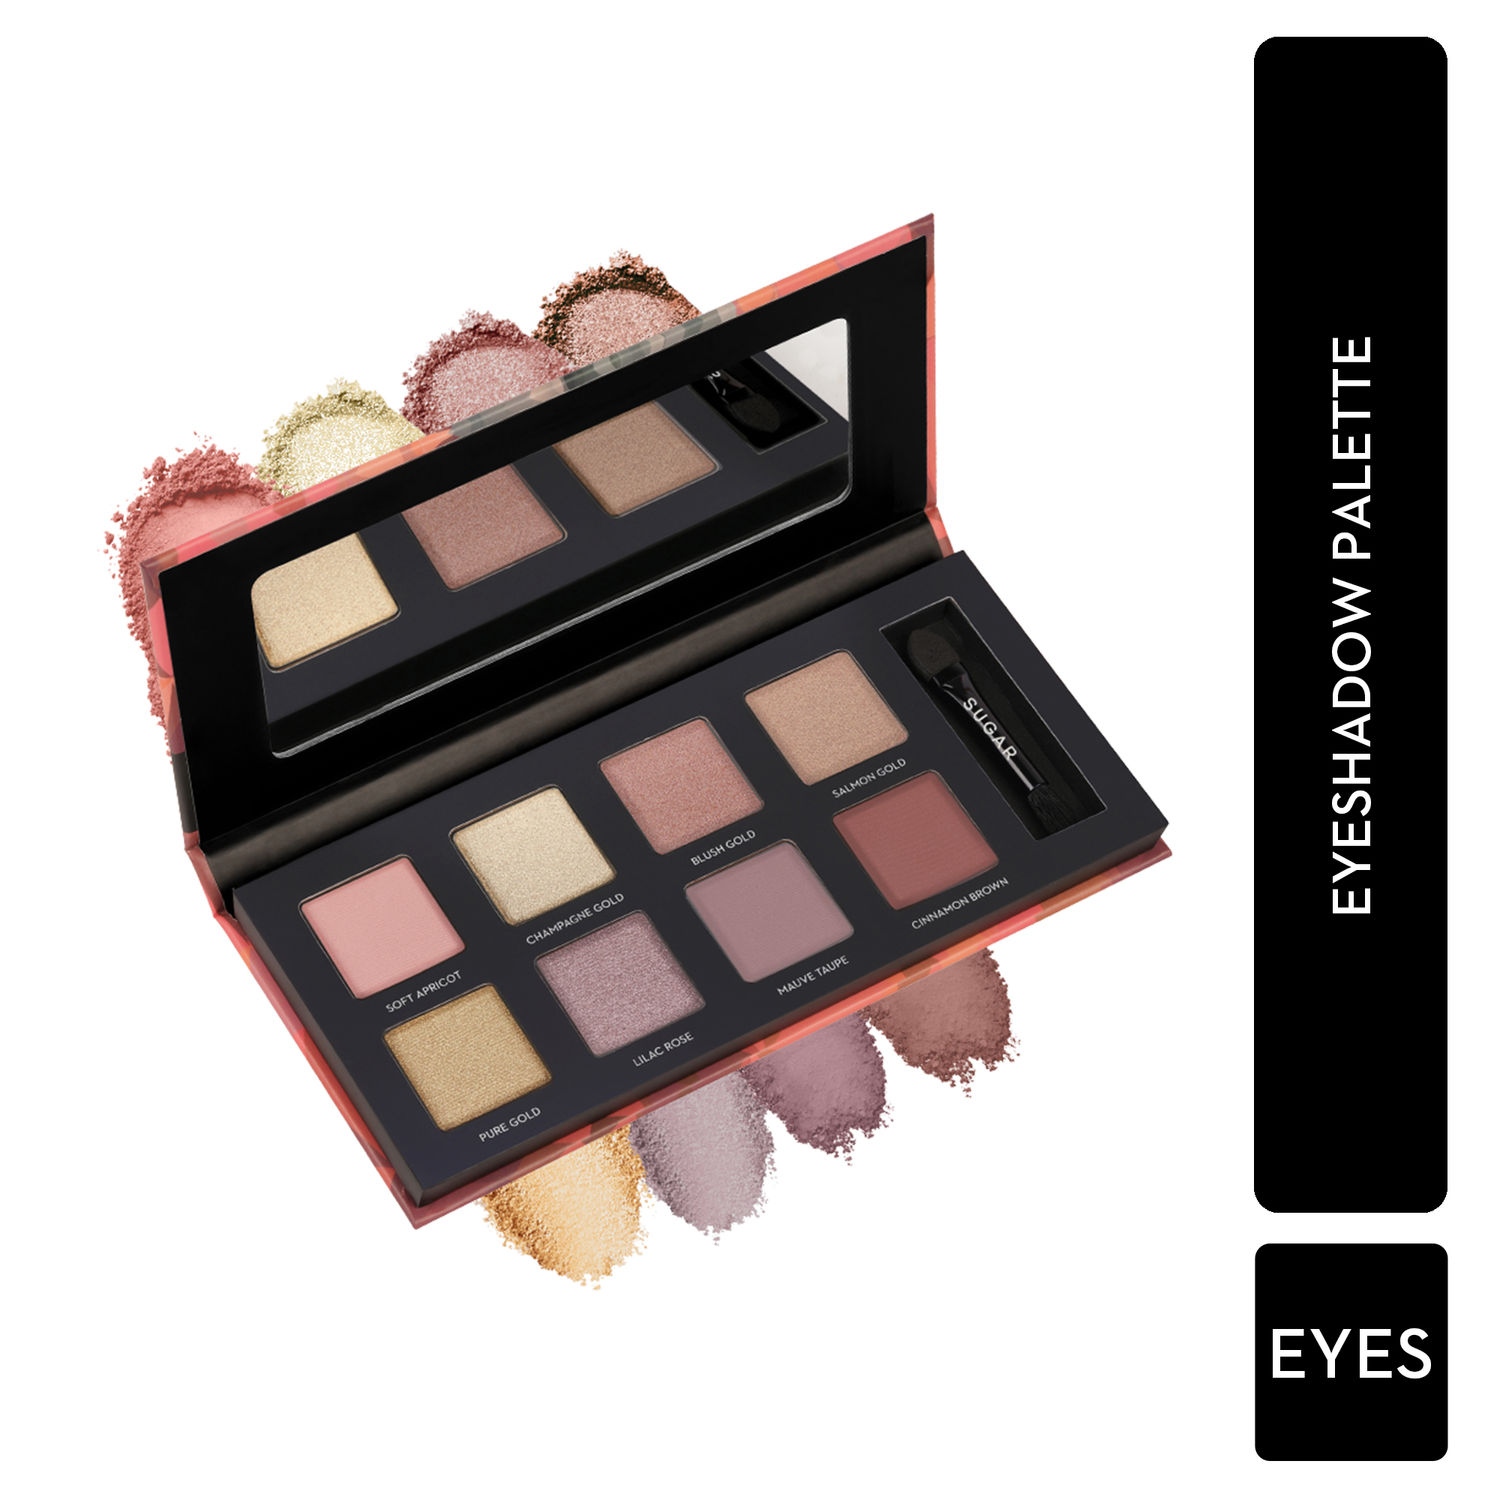 Buy SUGAR Cosmetics - Blend The Rules - Eyeshadow Palette - 04 Fetish (8 Nudes Shades) - Long Lasting, Smudge Proof Eyeshadow for Smoky Eye Look, Paraben-Free - Purplle